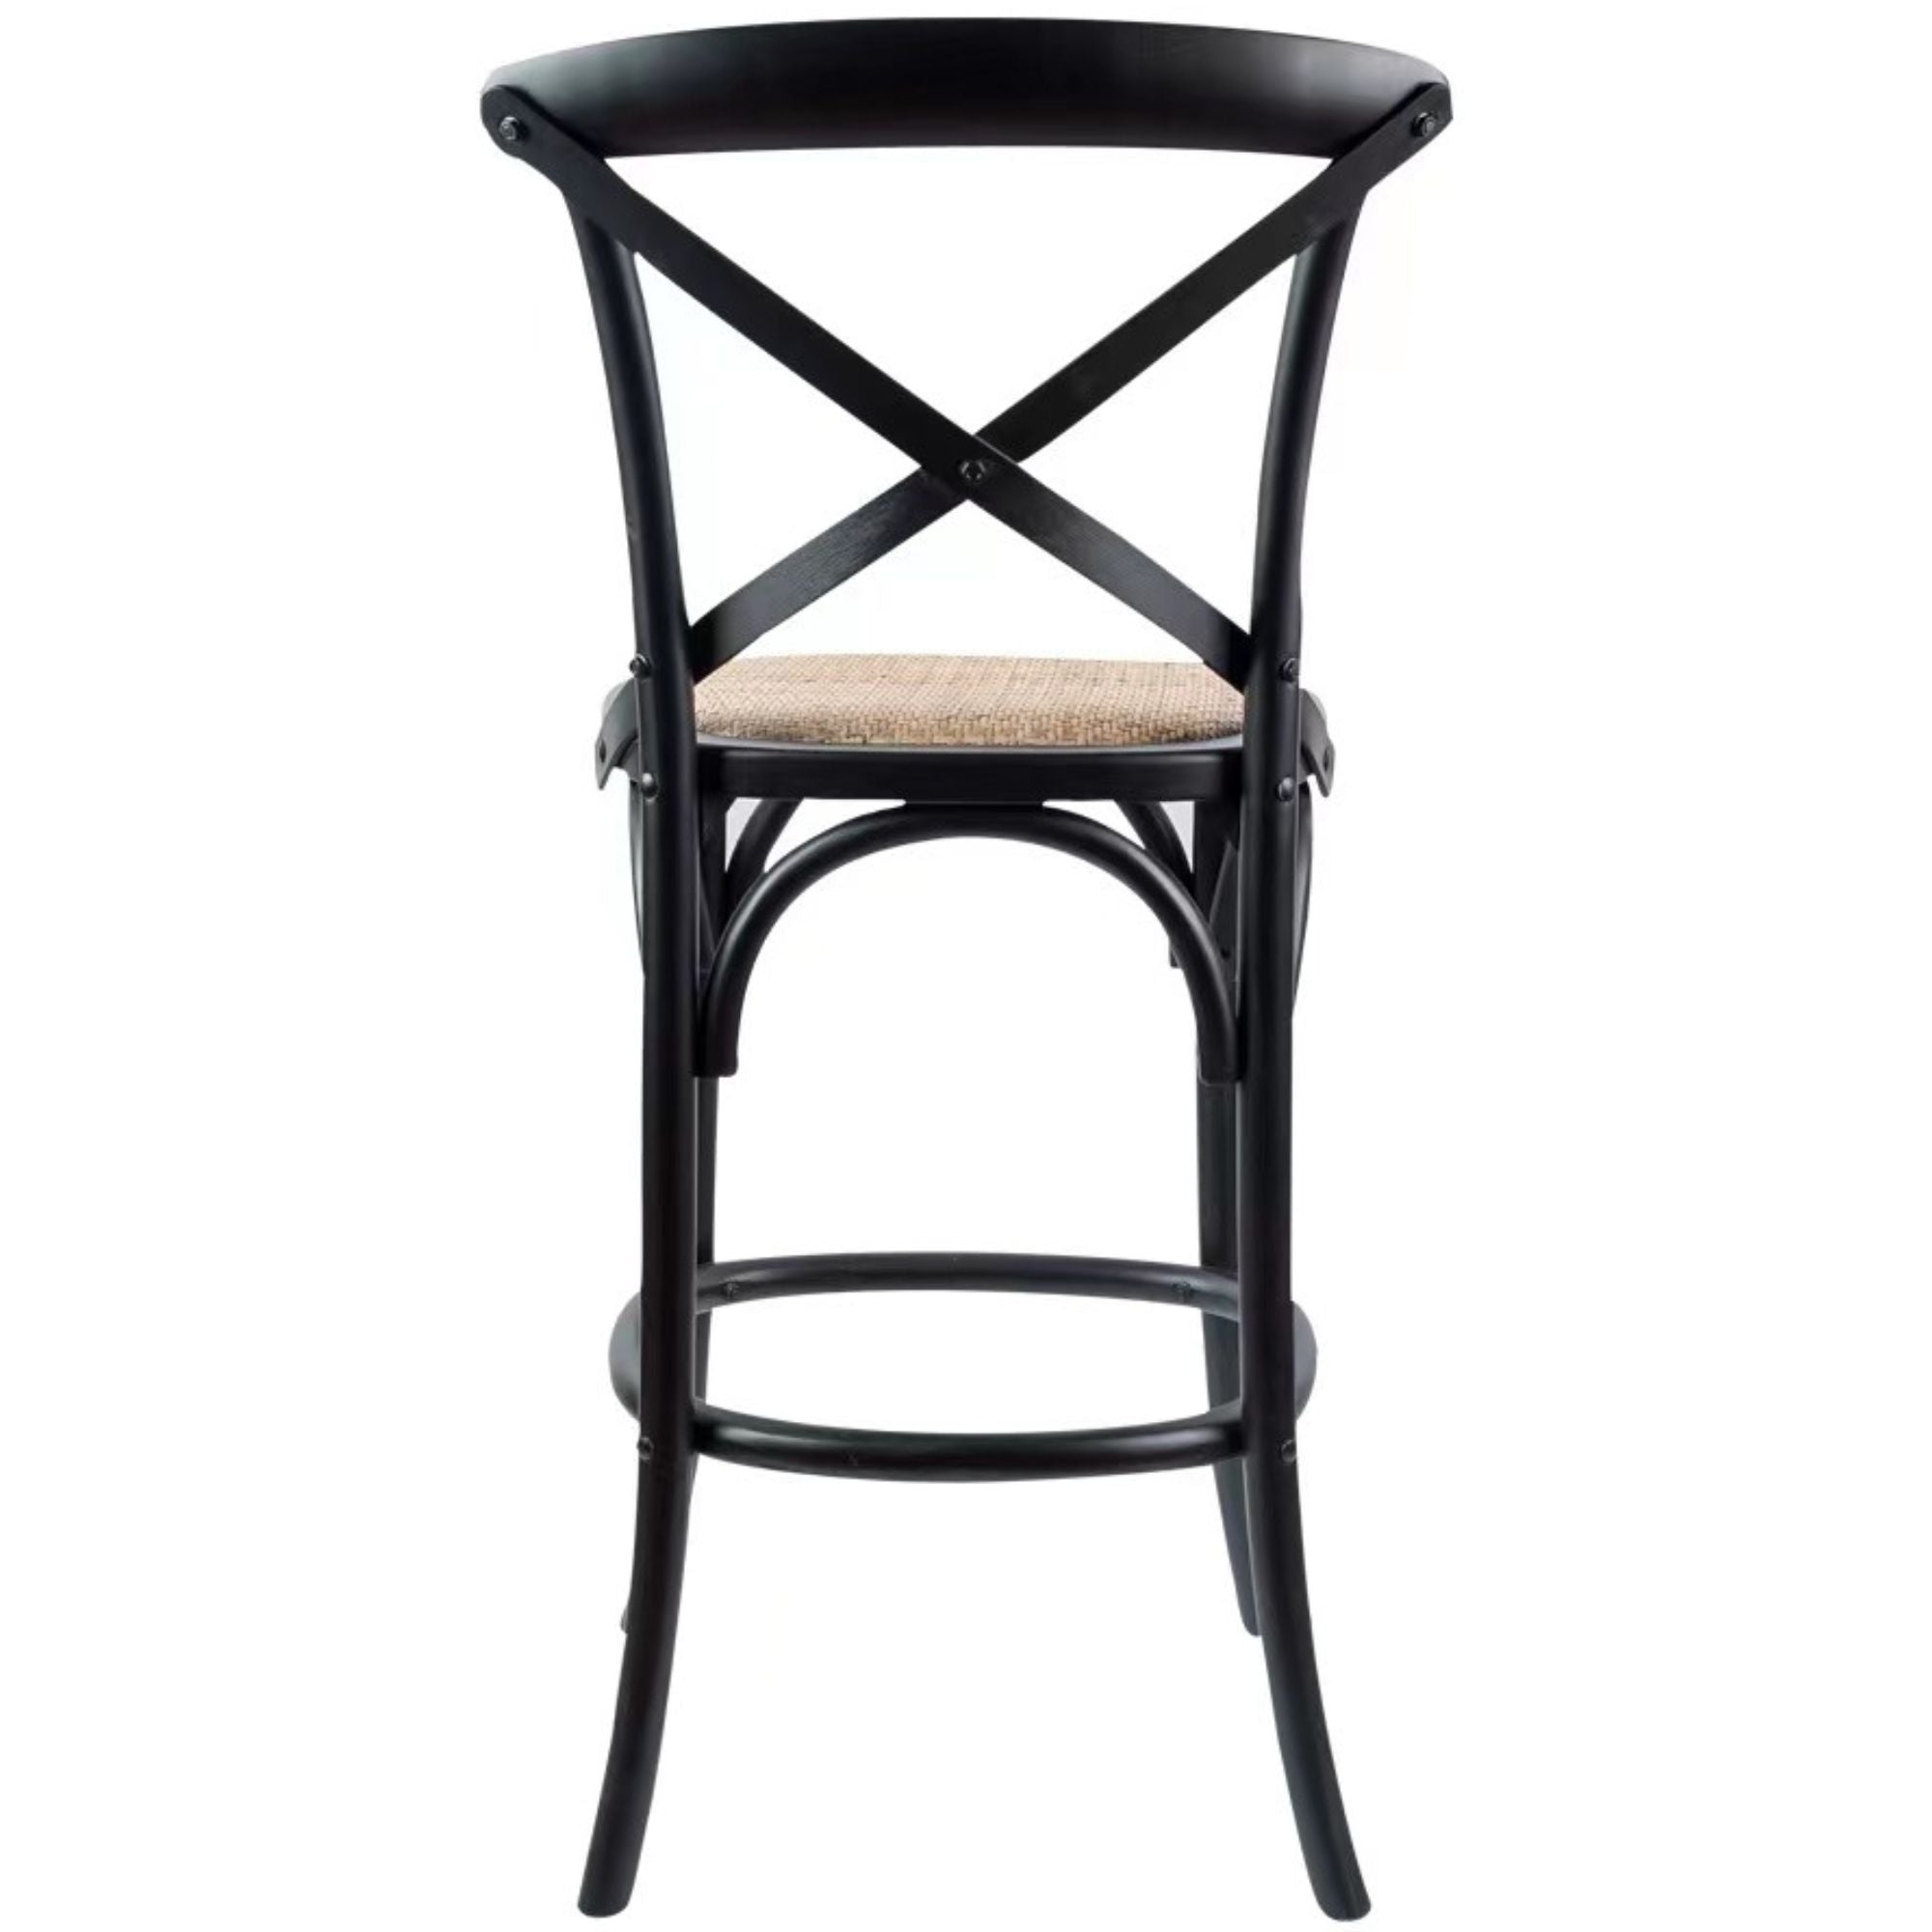 Crossback Bar Stools Dining Chair Solid Birch Timber Rattan Seat - Black